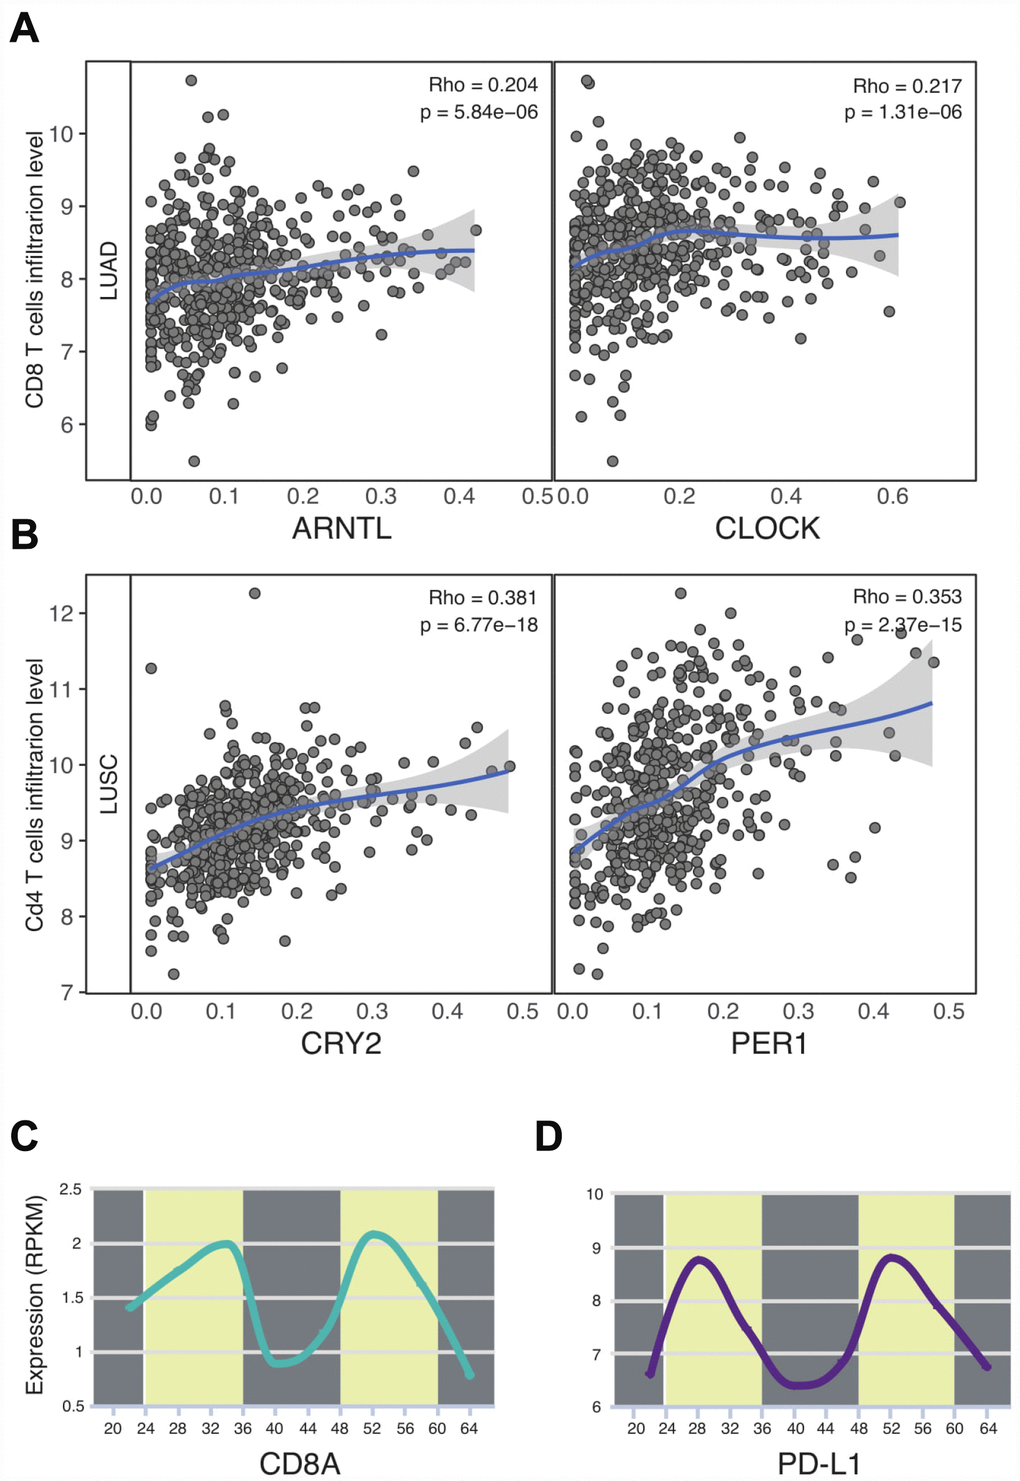 Circadian clock associates with the immune infiltrates and PD-L1 immune checkpoint. (A, B) Circadian genes were correlated with CD8 T cells and CD4 T cells. (C) CD8A expression was time-dependent. (D) The circadian rhythm of PD-L1. Abbreviations: LUAD, lung adenocarcinoma; LUSC, lung squamous cell carcinoma.